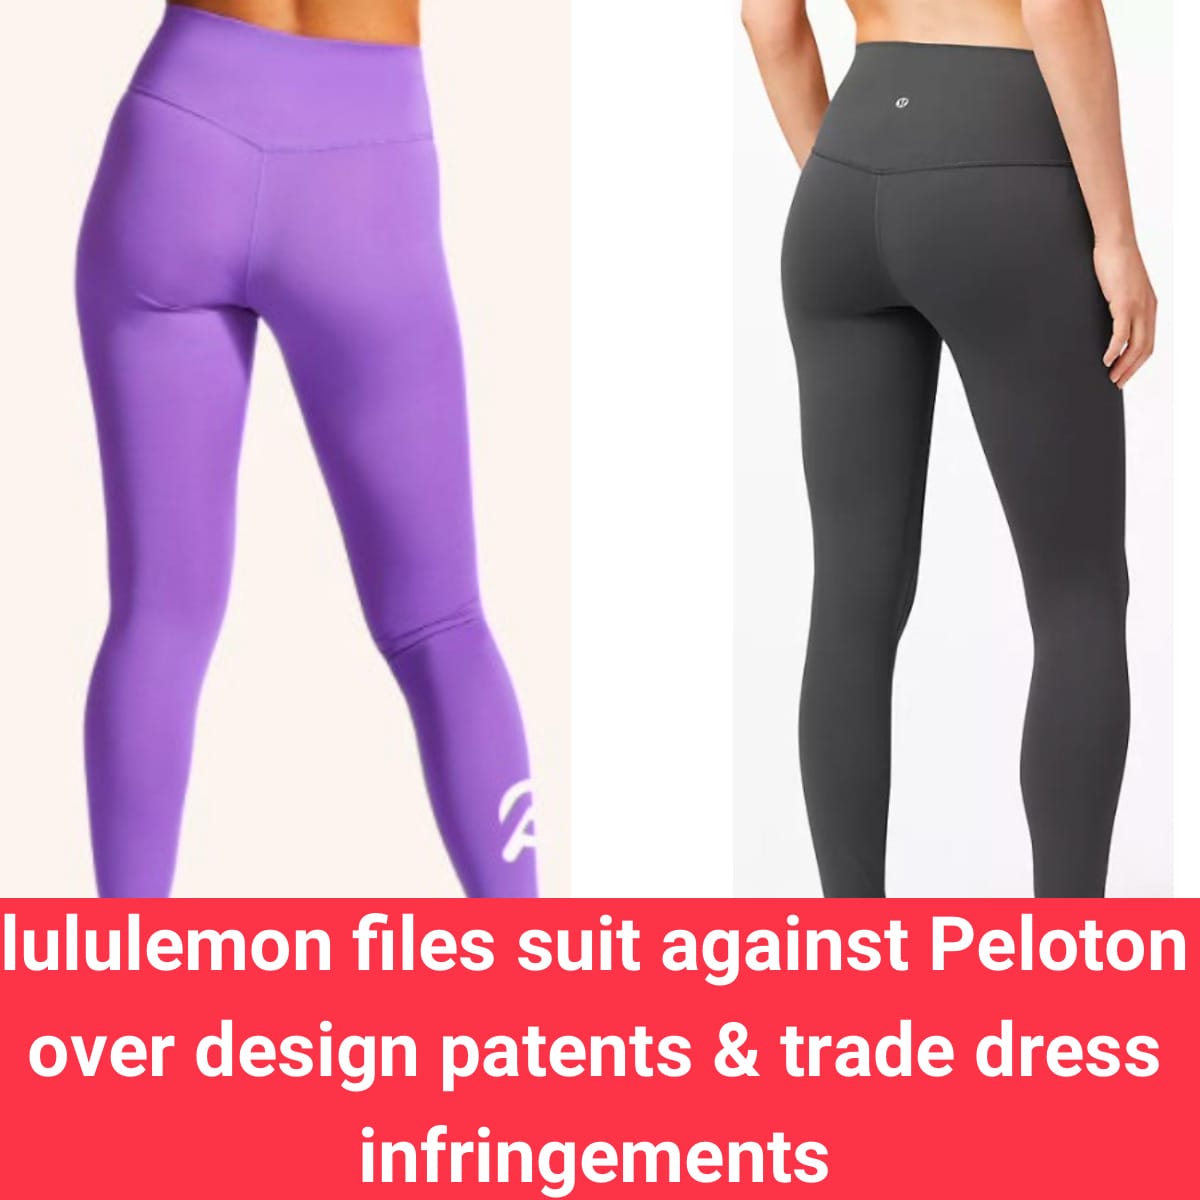 Workers Making Lululemon Leggings Say They're Beaten and Underpaid